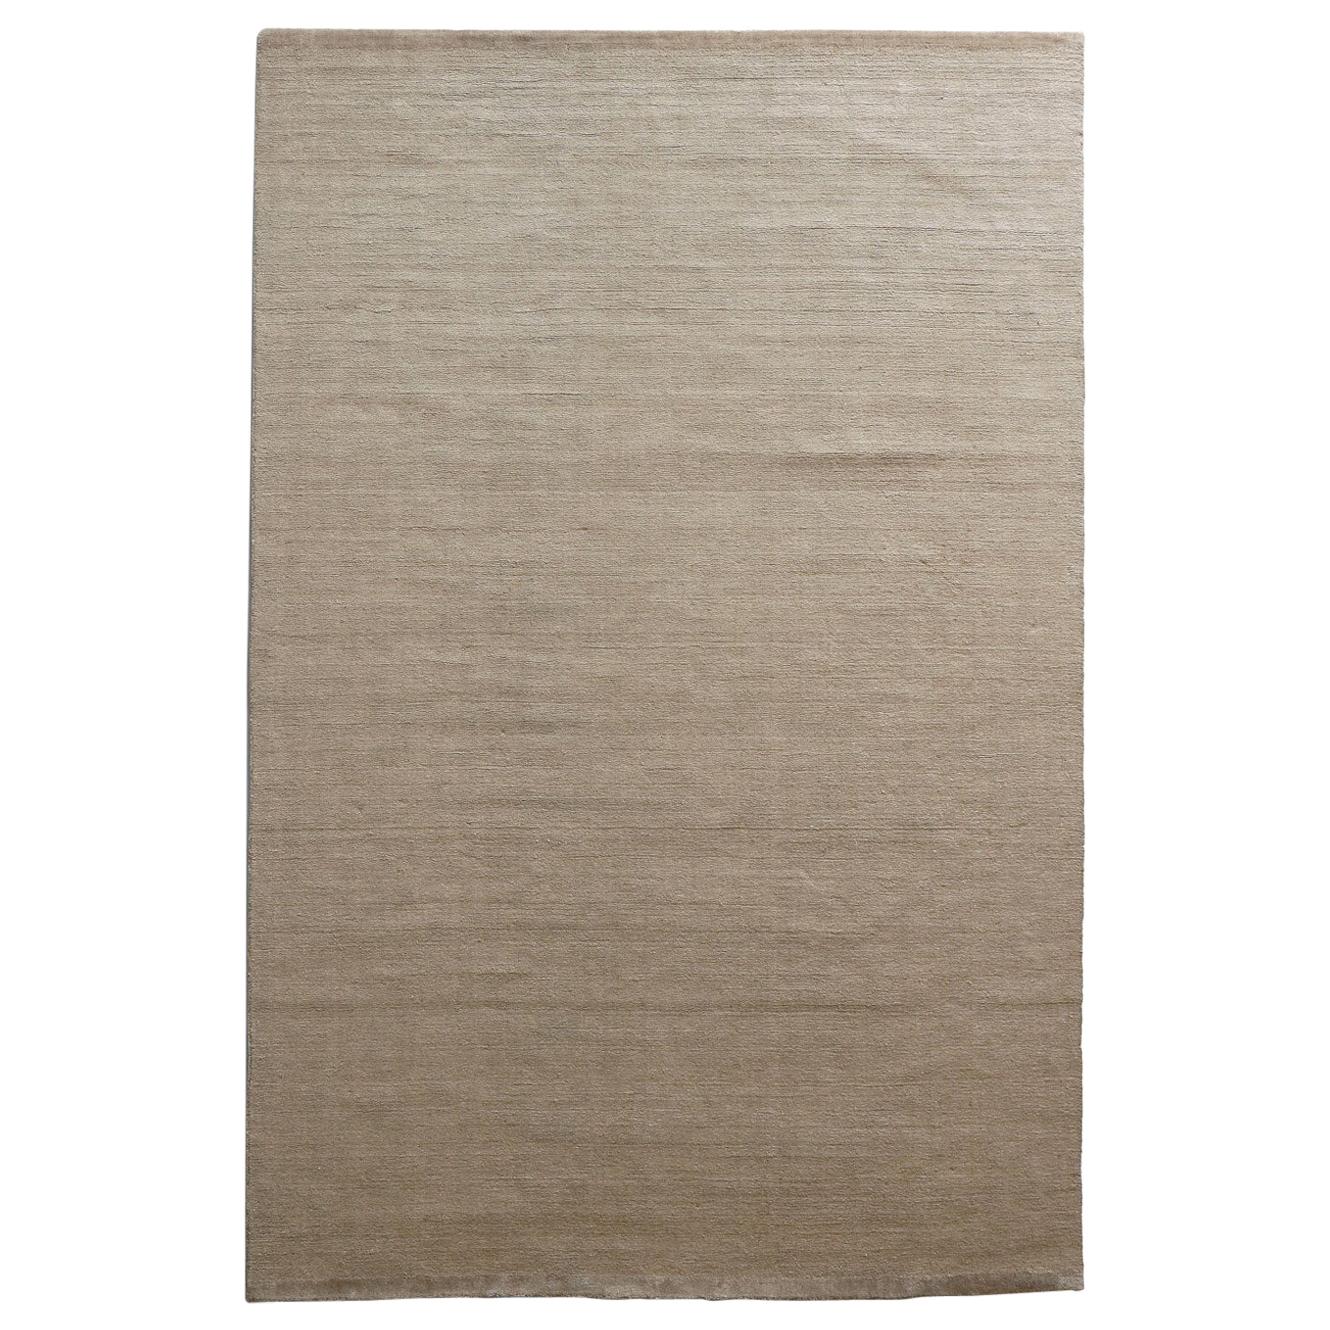 Contemporary Antibacterial Natural Linen Rug by Deanna Comellini 200x300 cm